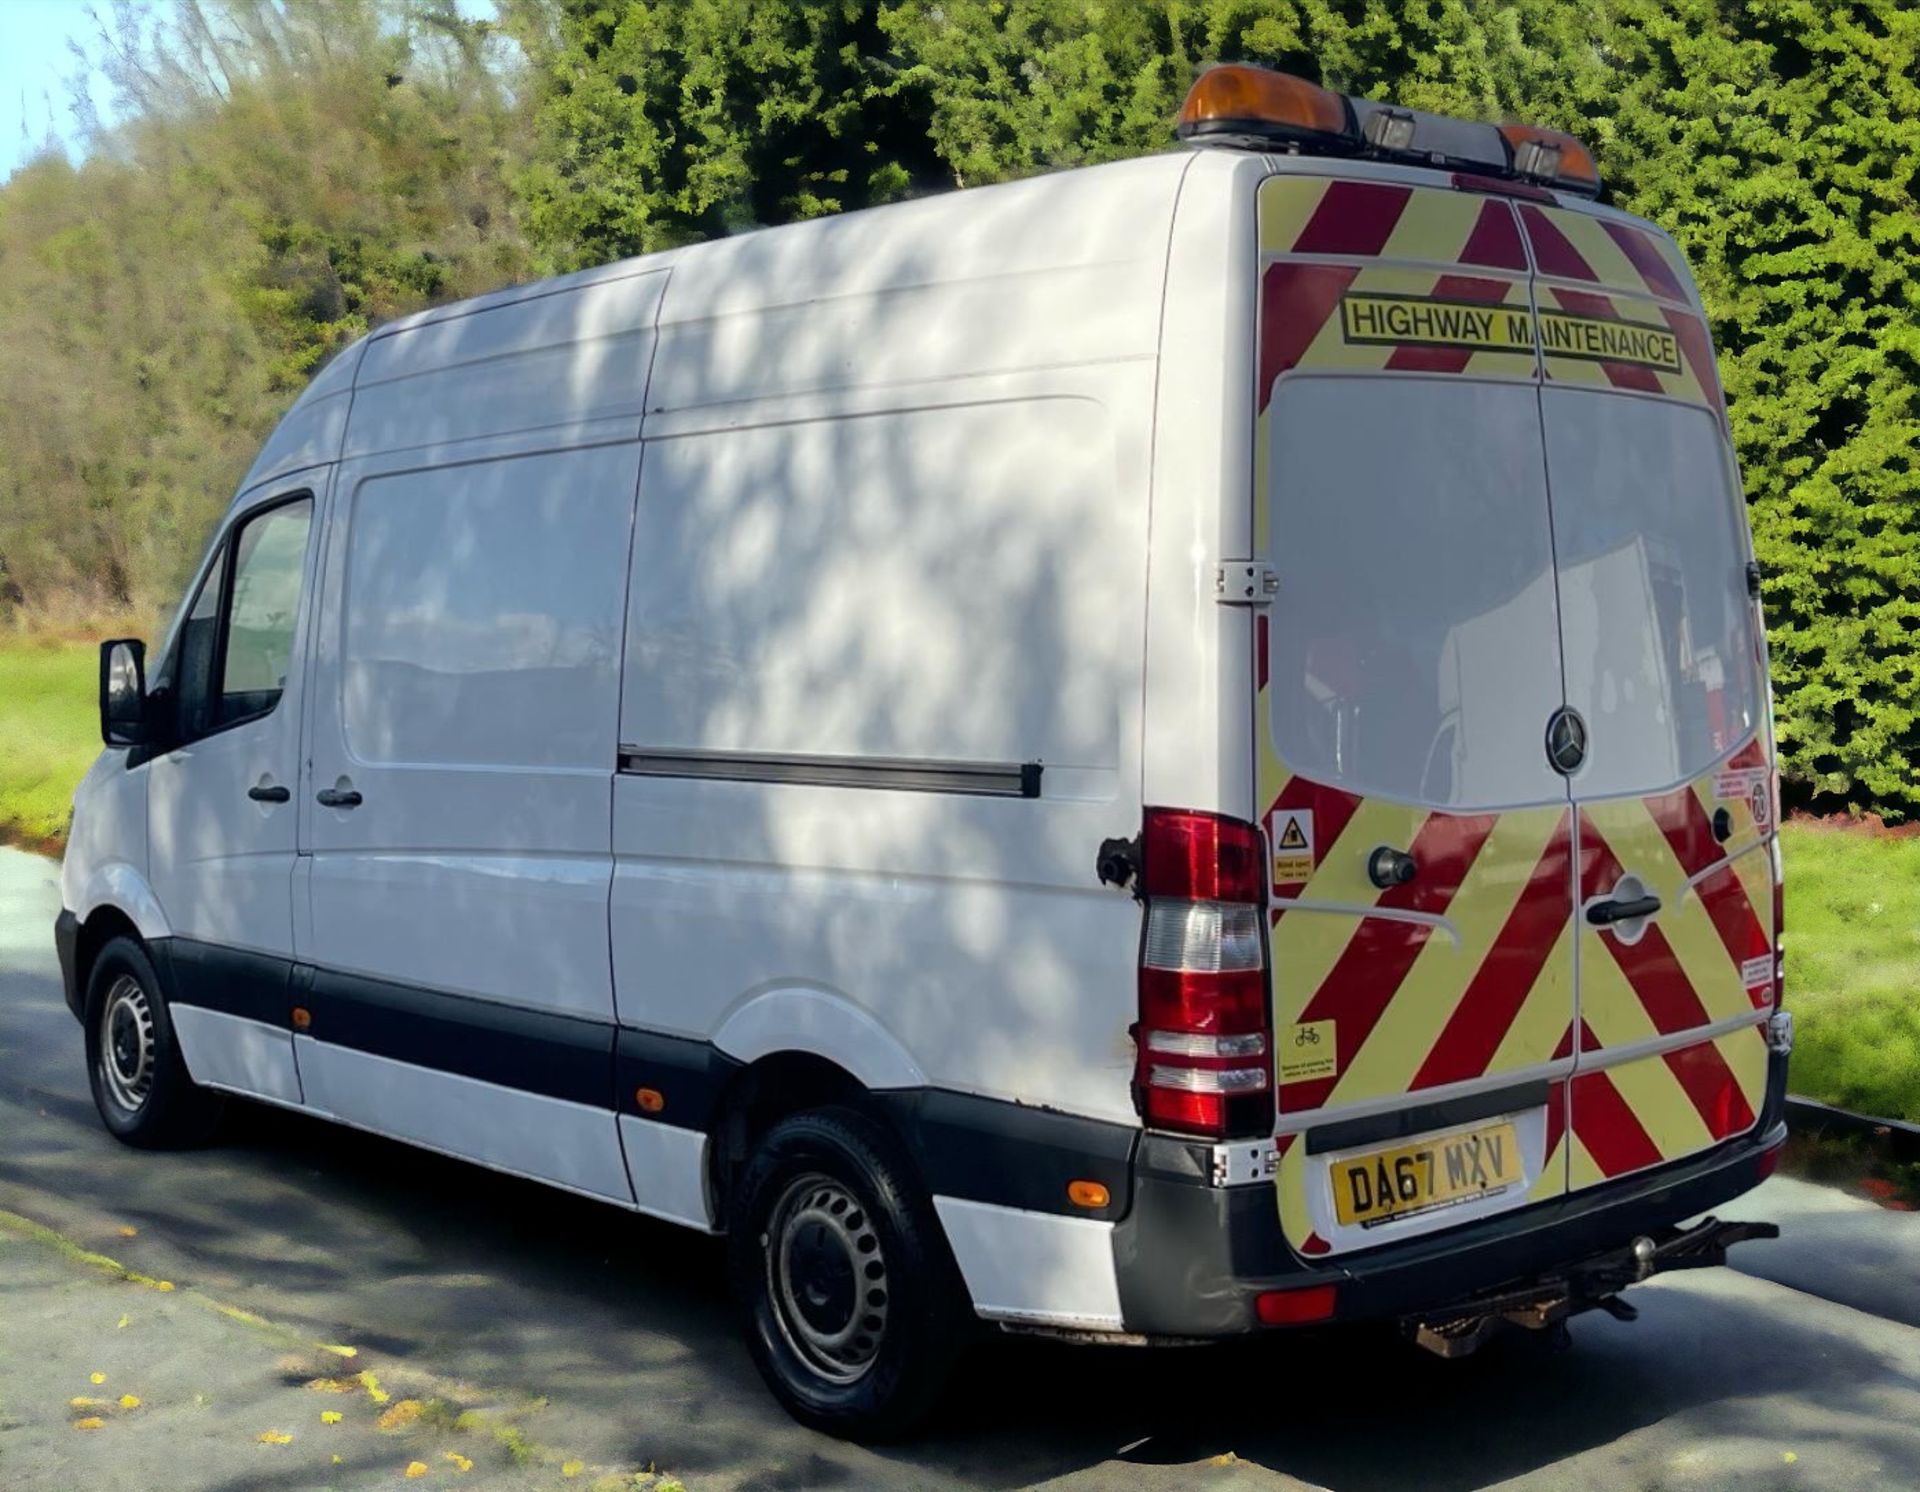 2017-67 REG MERCEDES SPRINTER 314 CDI MWB -HPI CLEAR - READY FOR WORK! - Image 2 of 9